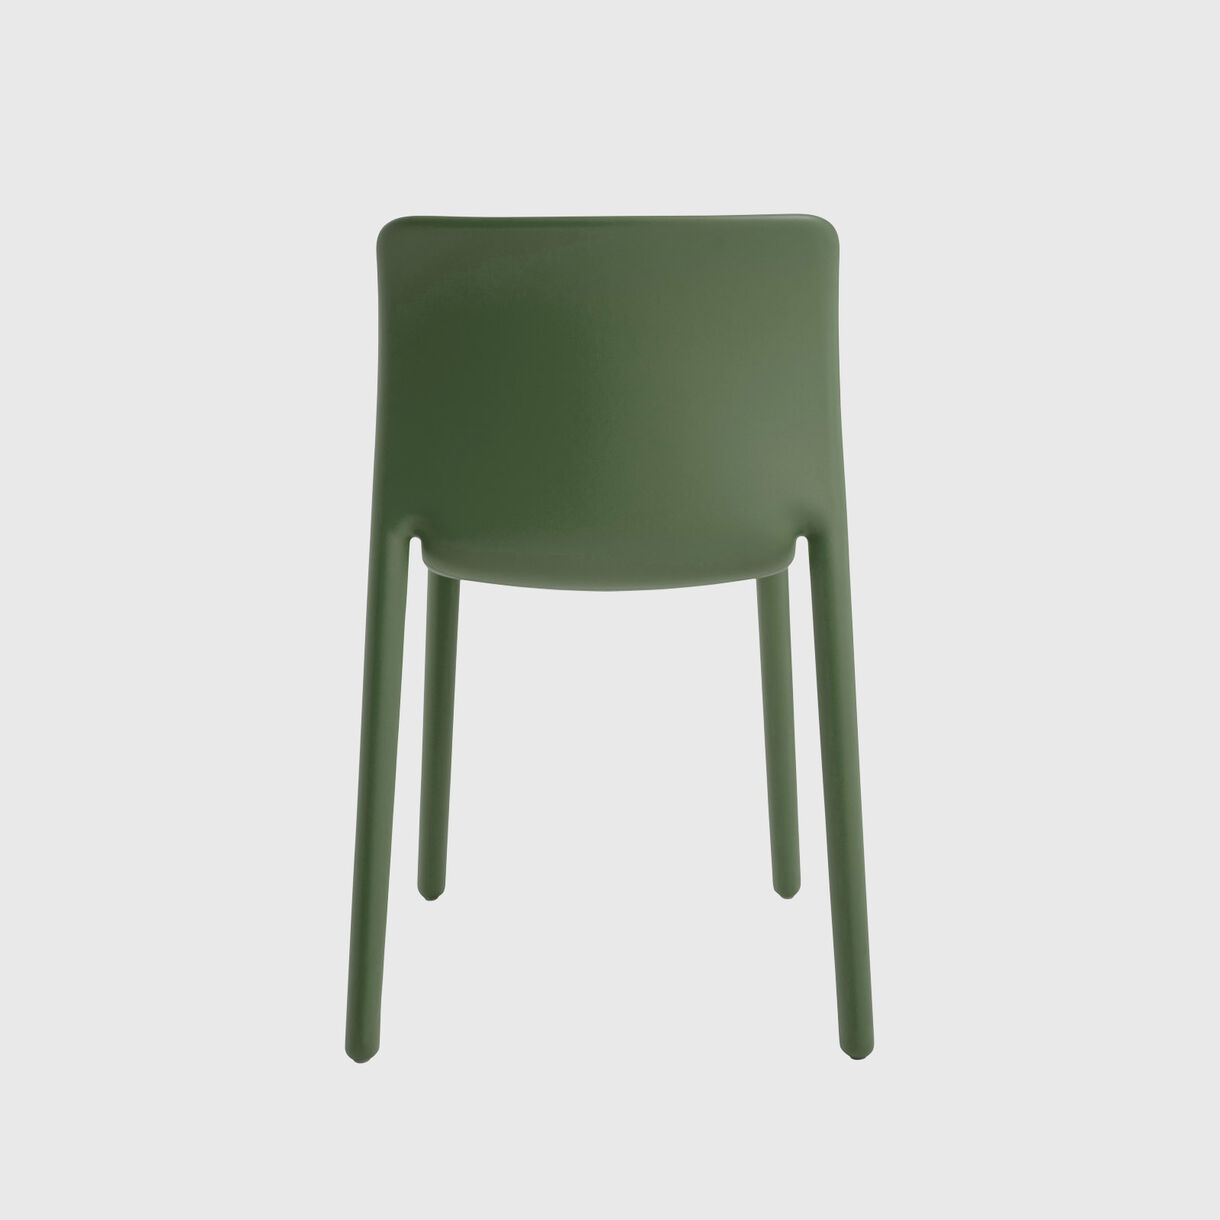 First Chair, Olive Green